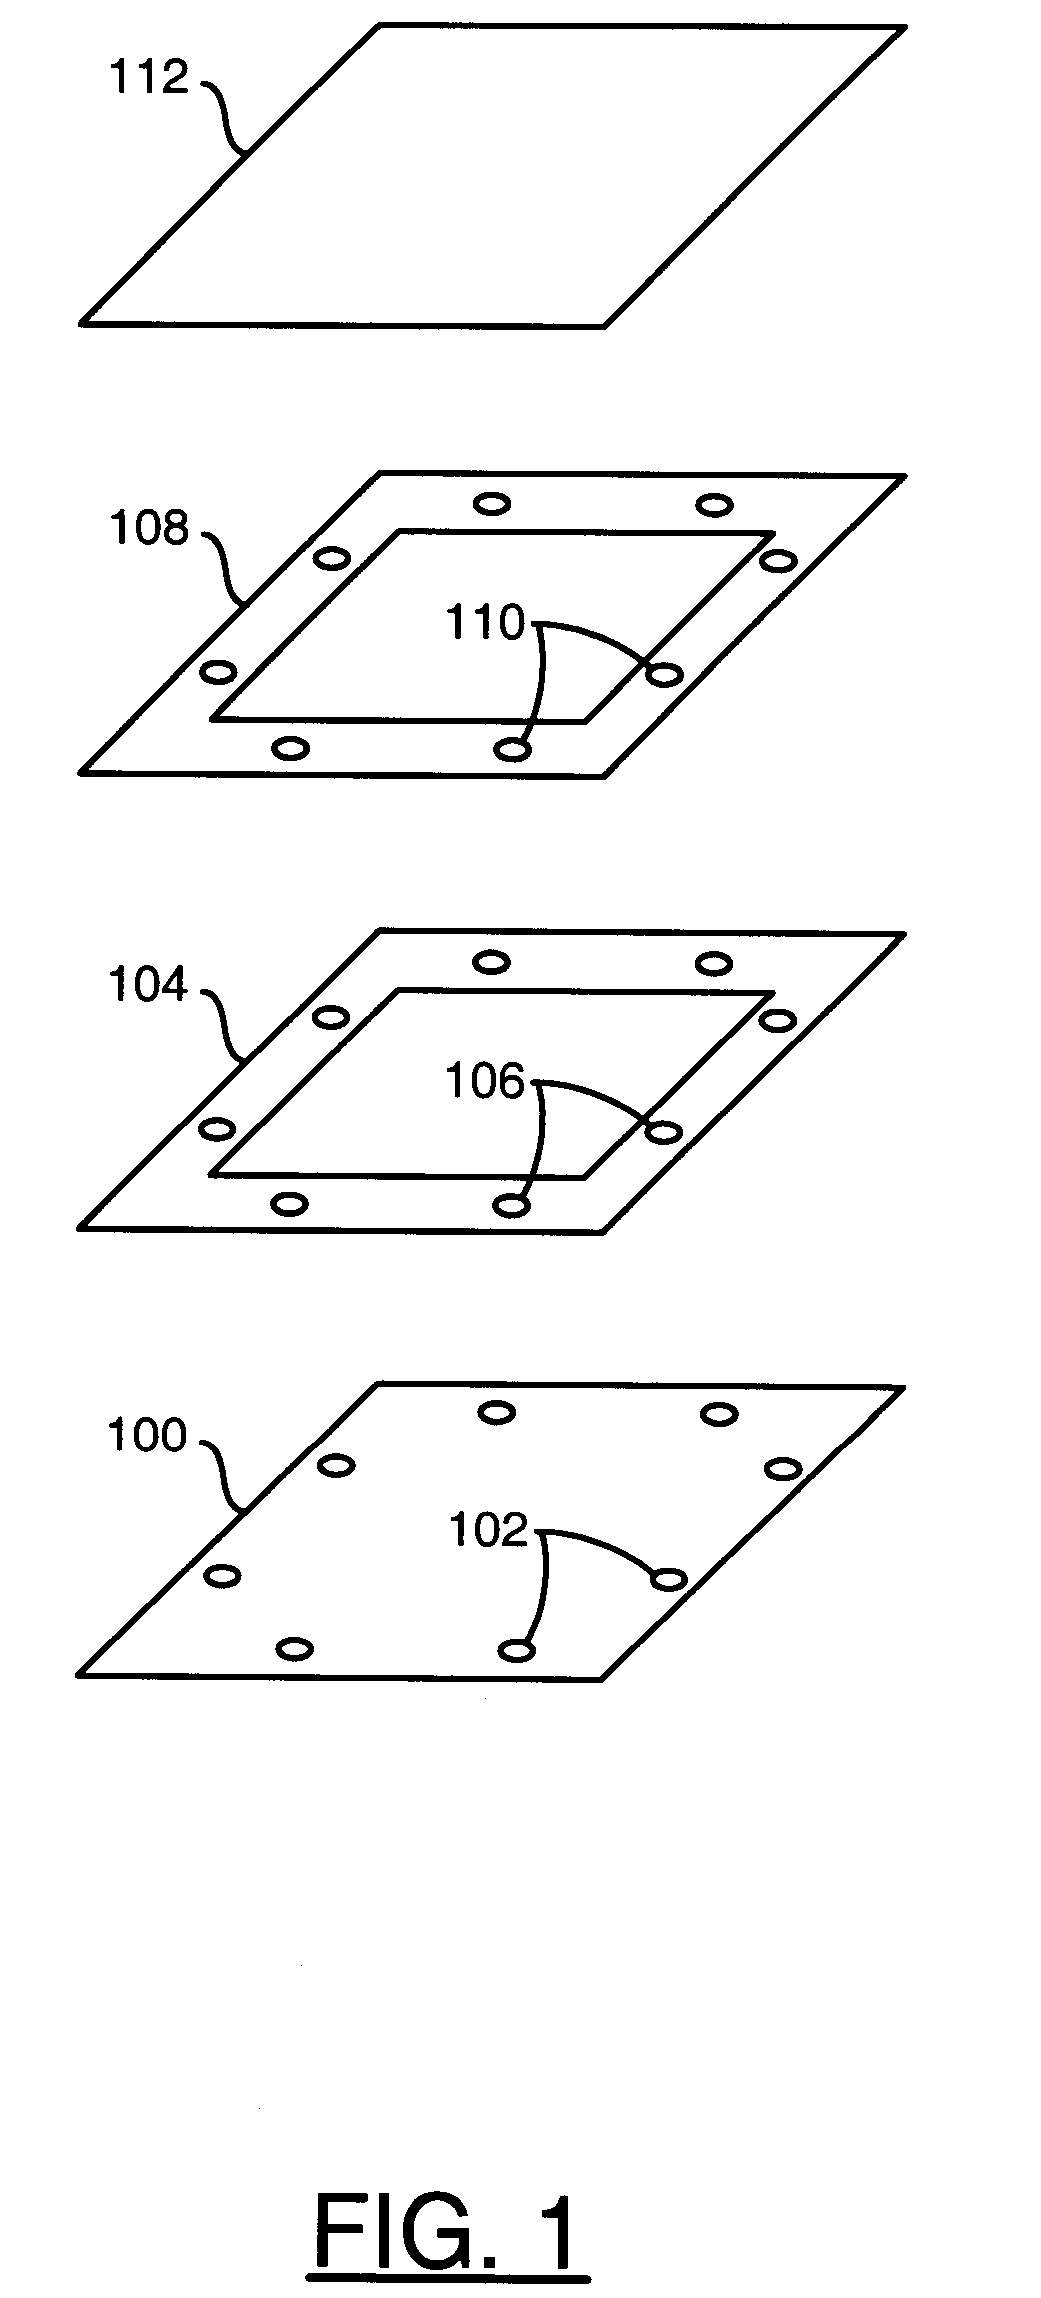 Process of grounding heat spreader/stiffener to a flip chip package using solder and film adhesive